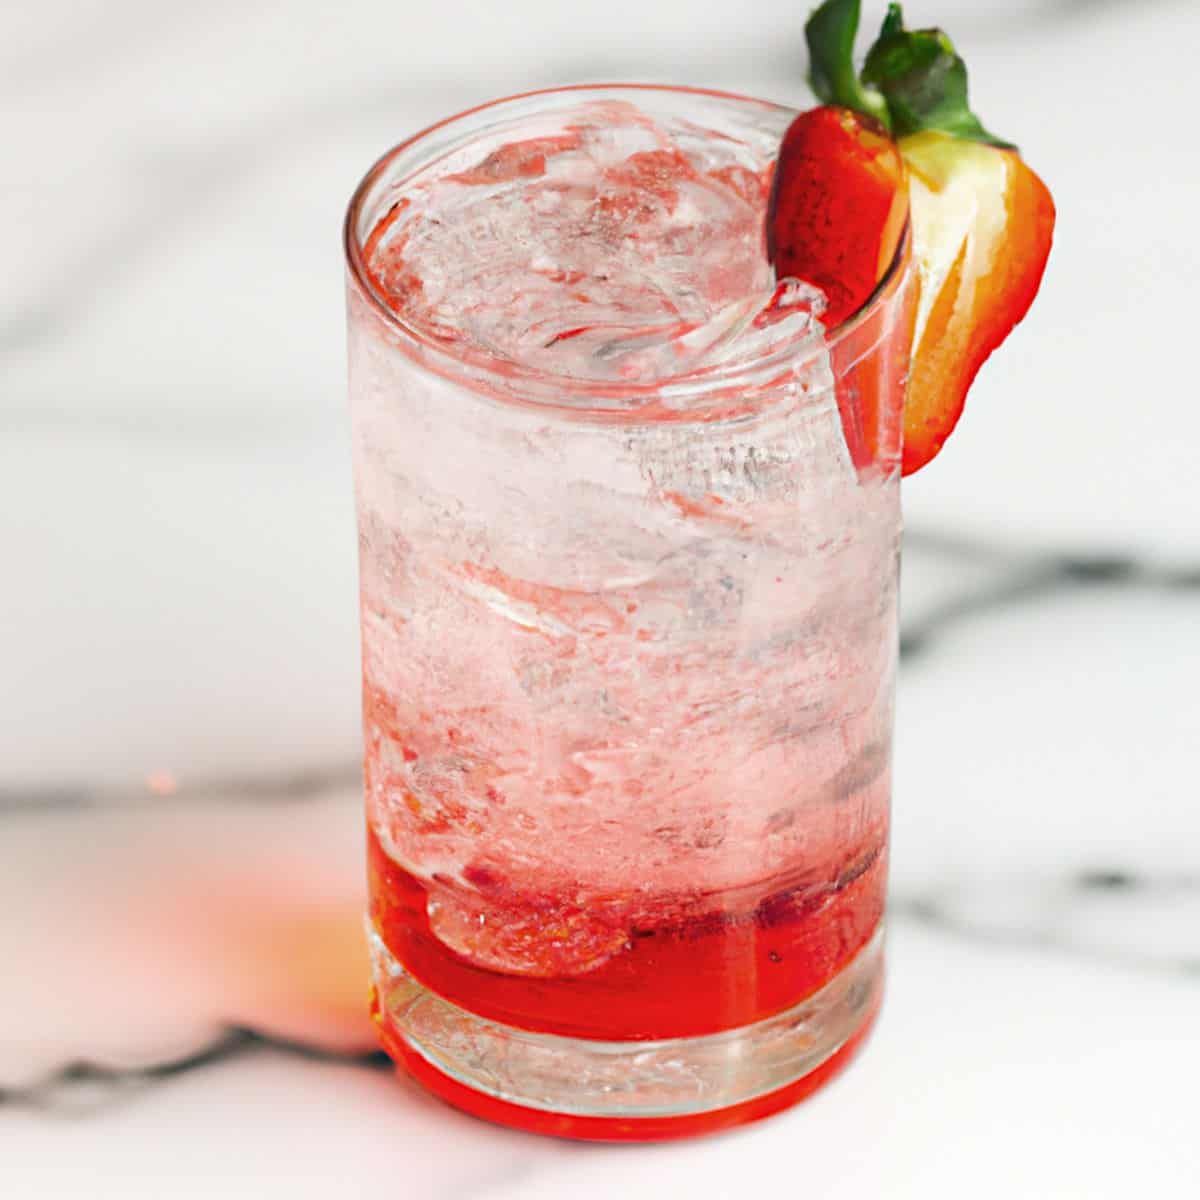 strawberry italian soda with a strawberry garnish on a marble counter